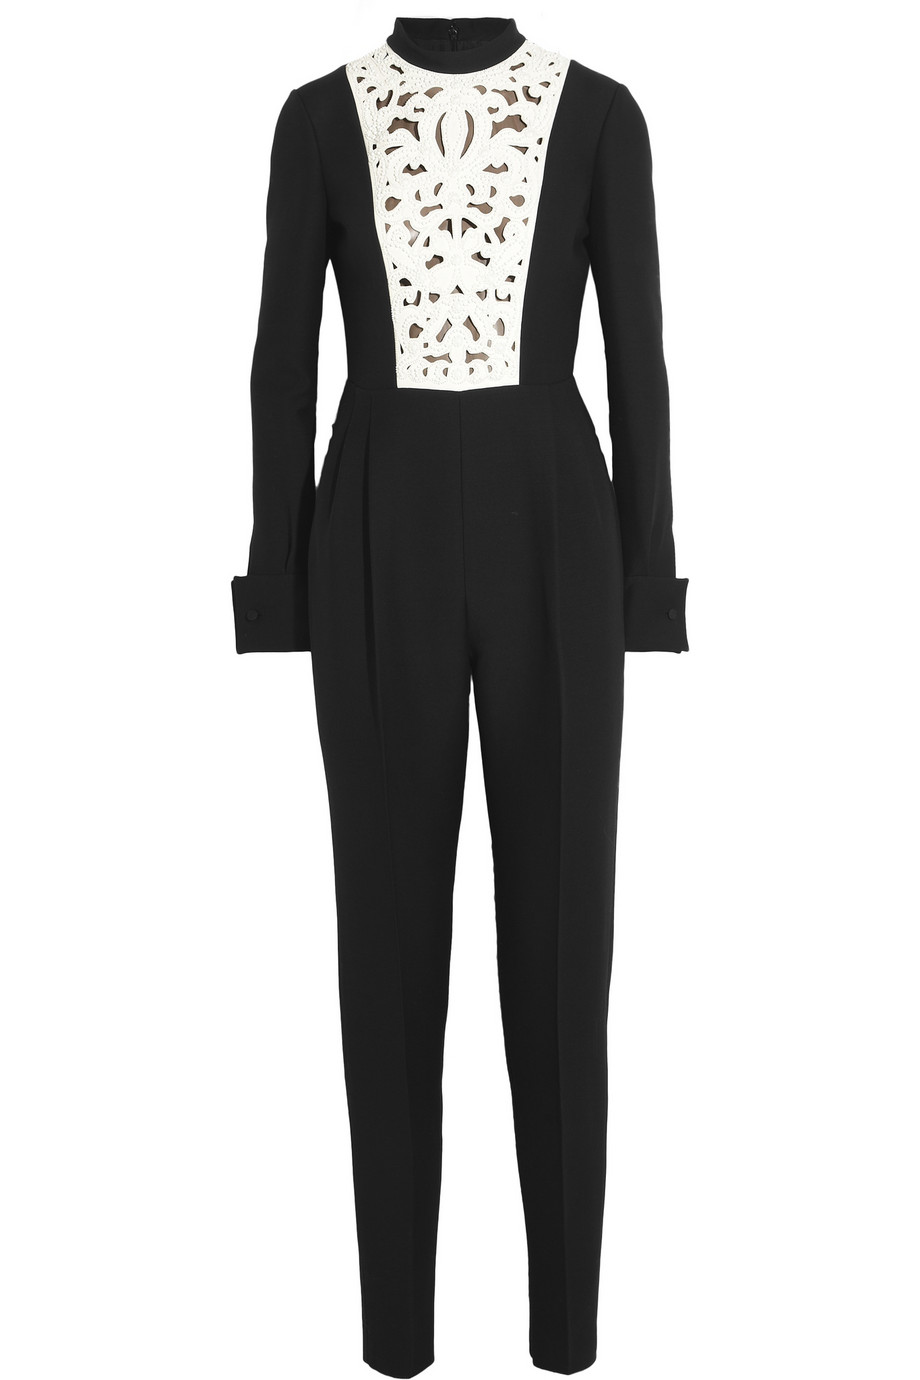 Lyst - Valentino Wool and Silk-blend Crepe Jumpsuit in Black